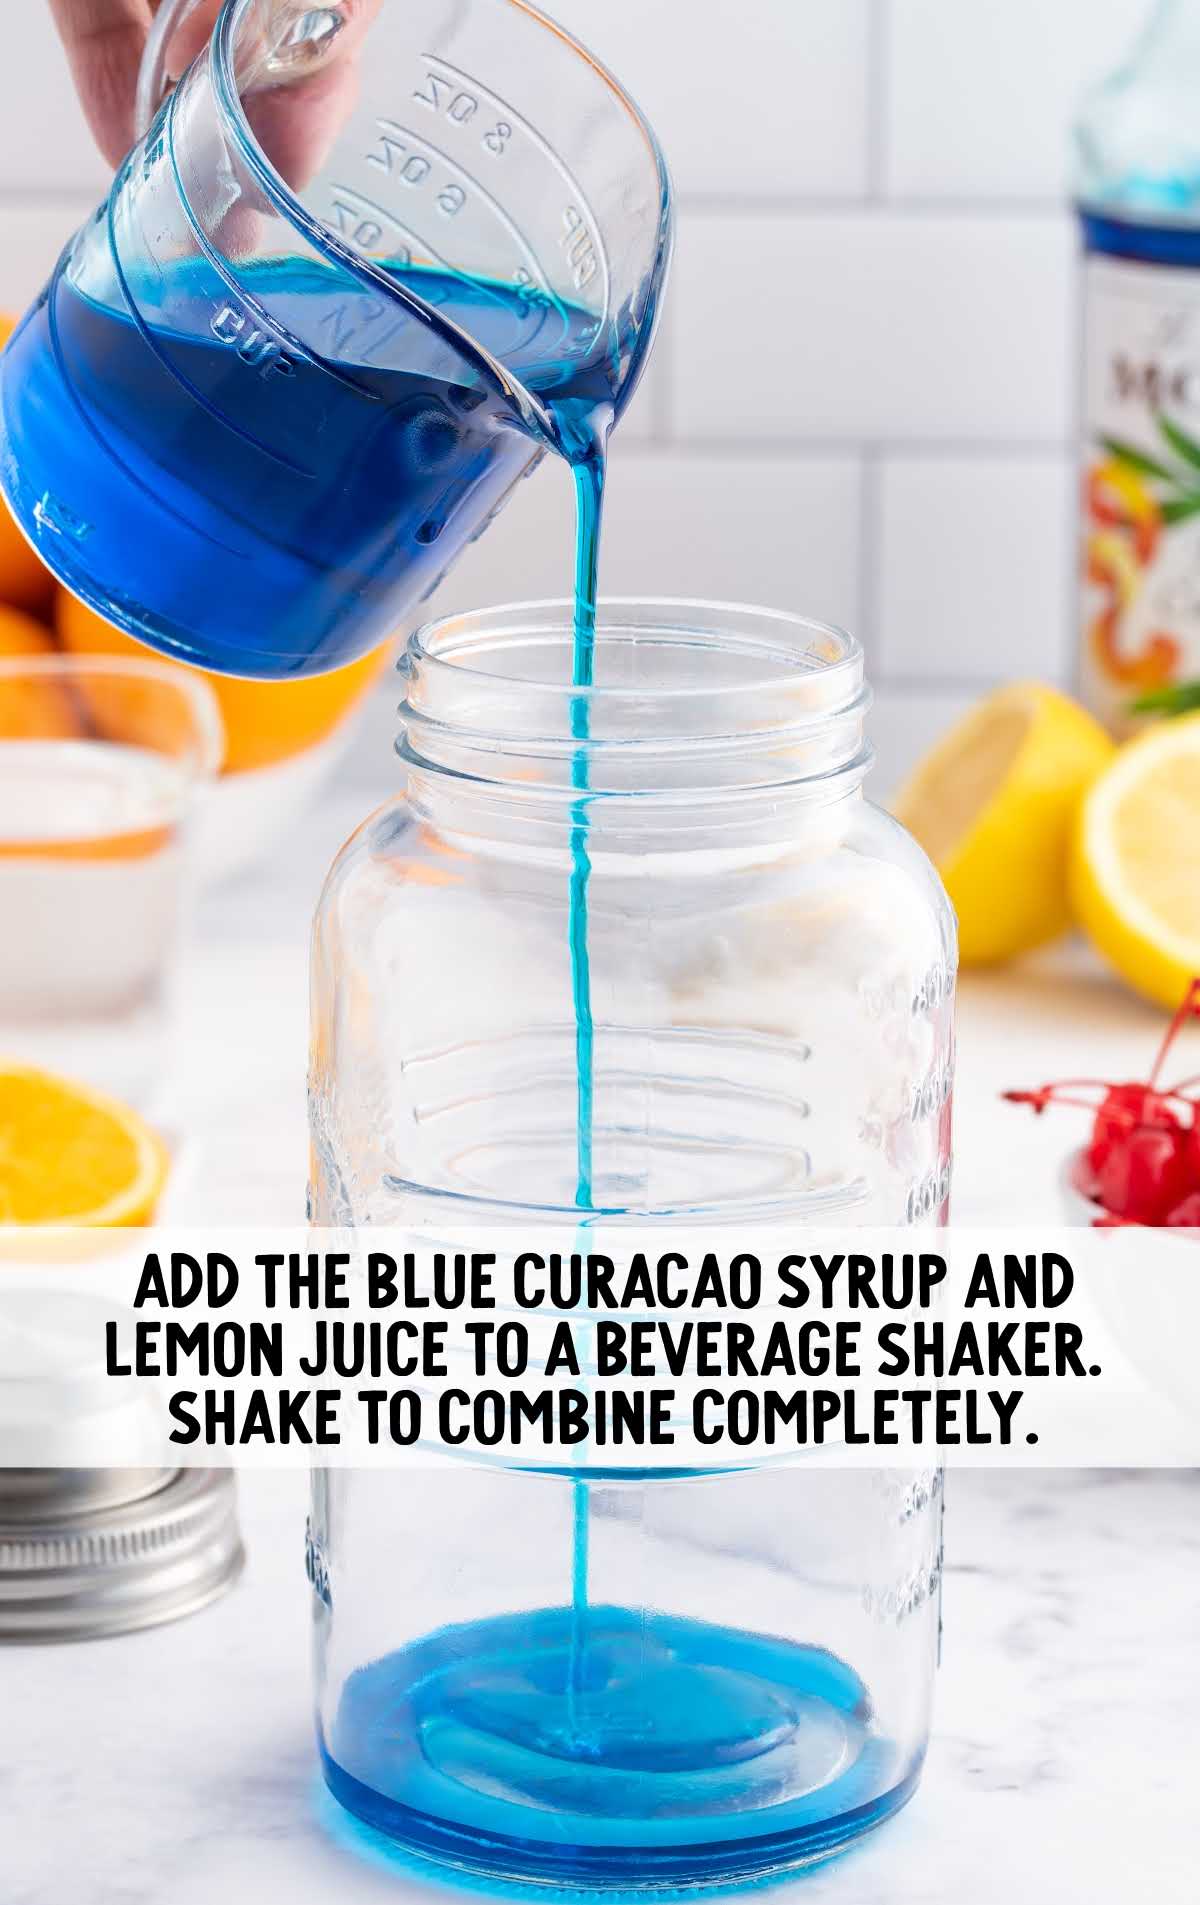 blue curacao syrup and lemon juice added to the shaker